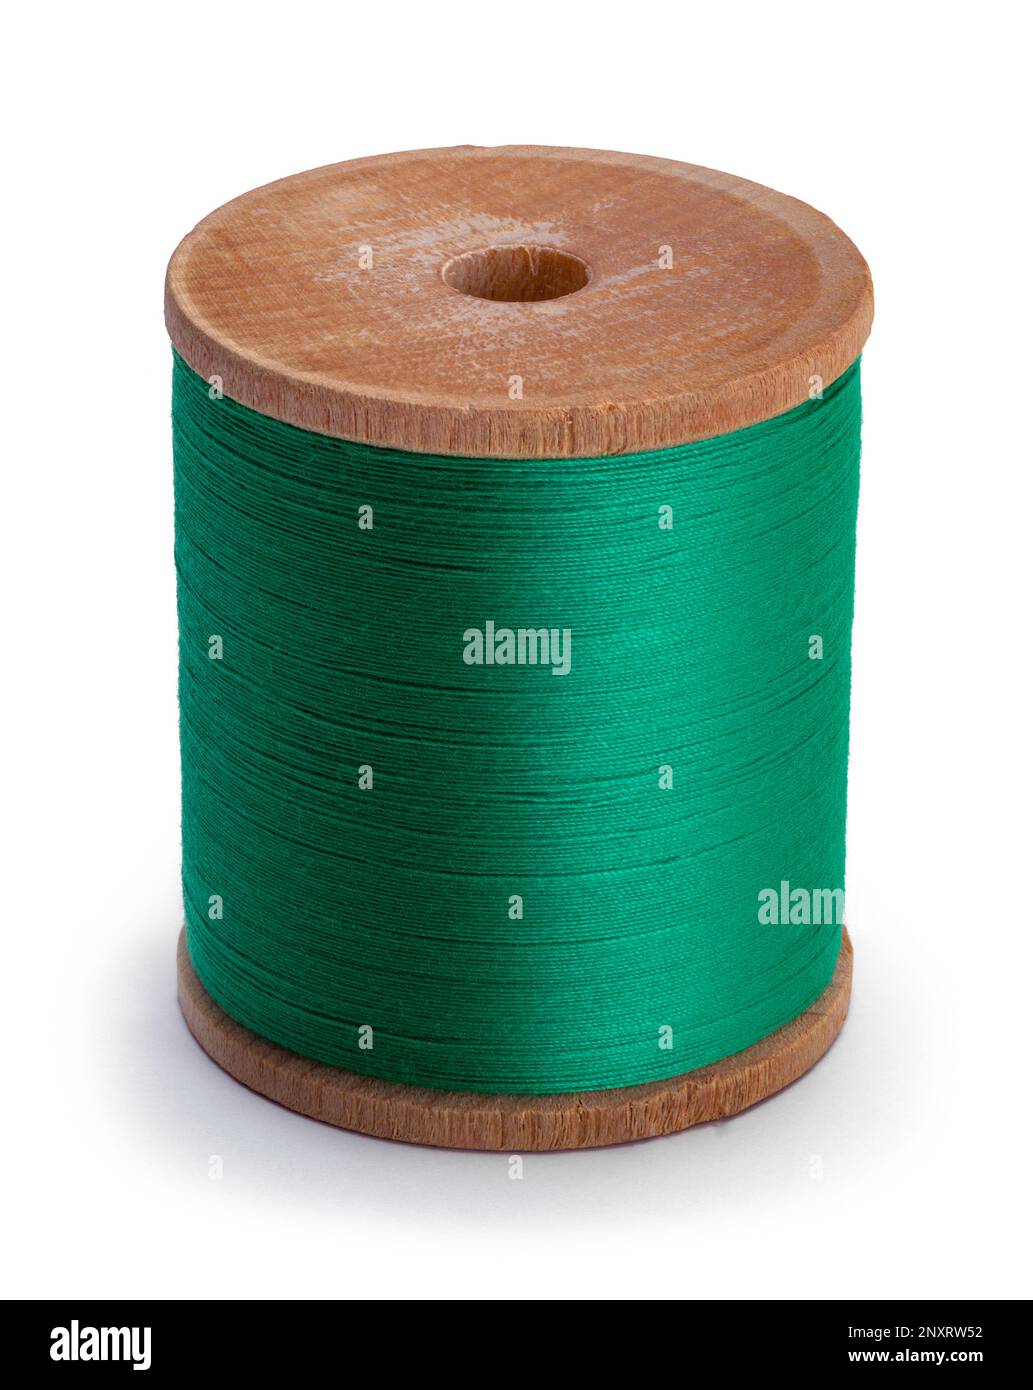 Green Thread Spool Cut Out on White. Stock Photo